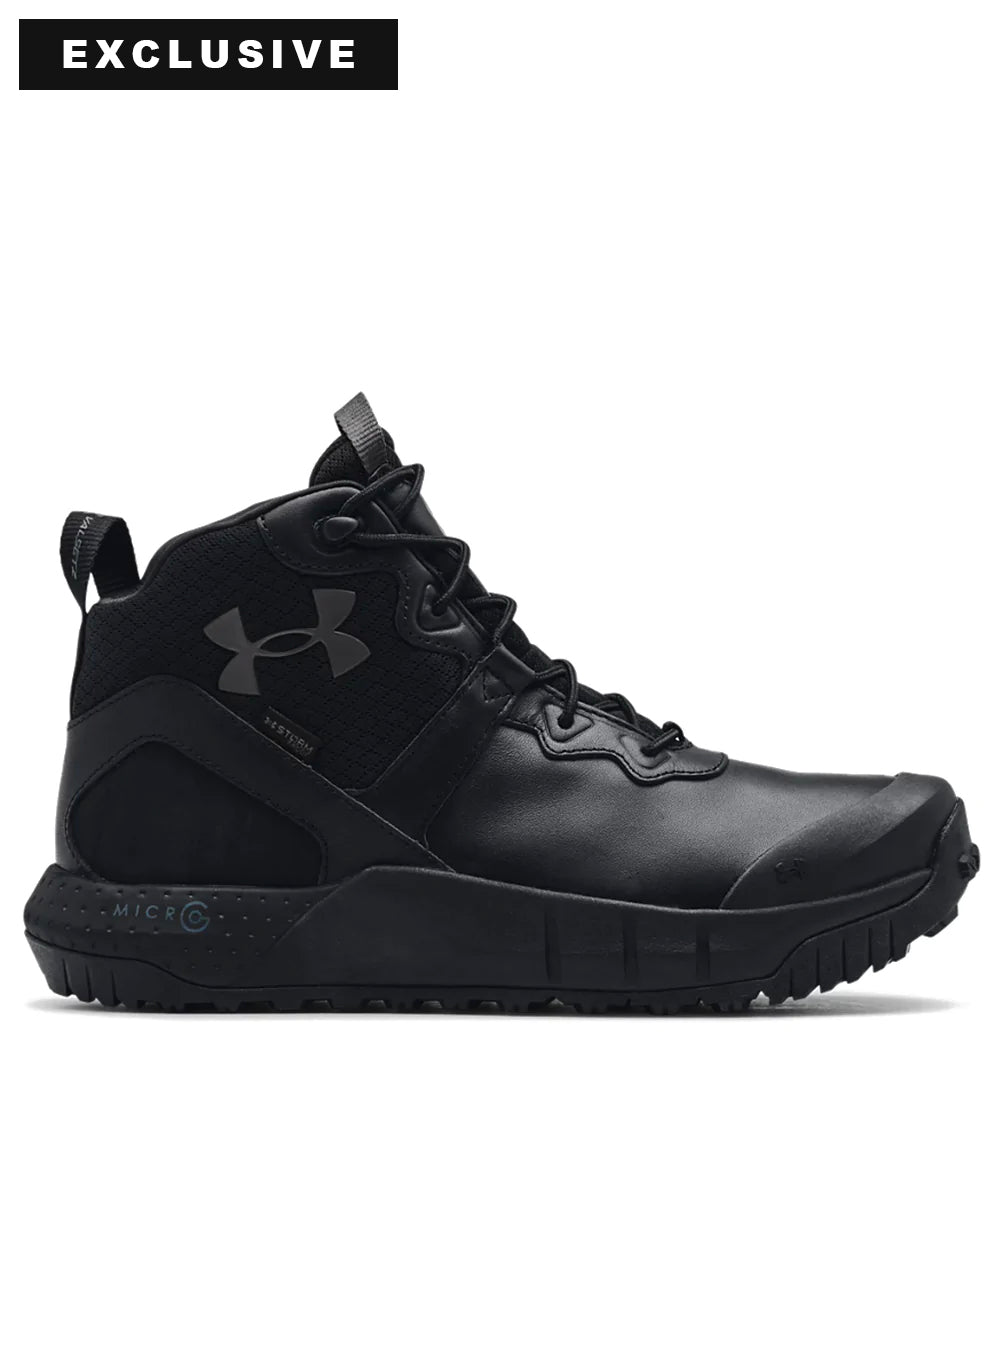 EXCLUSIVE - Under Armour Micro G Valsetz Mid Leather Waterproof Boots